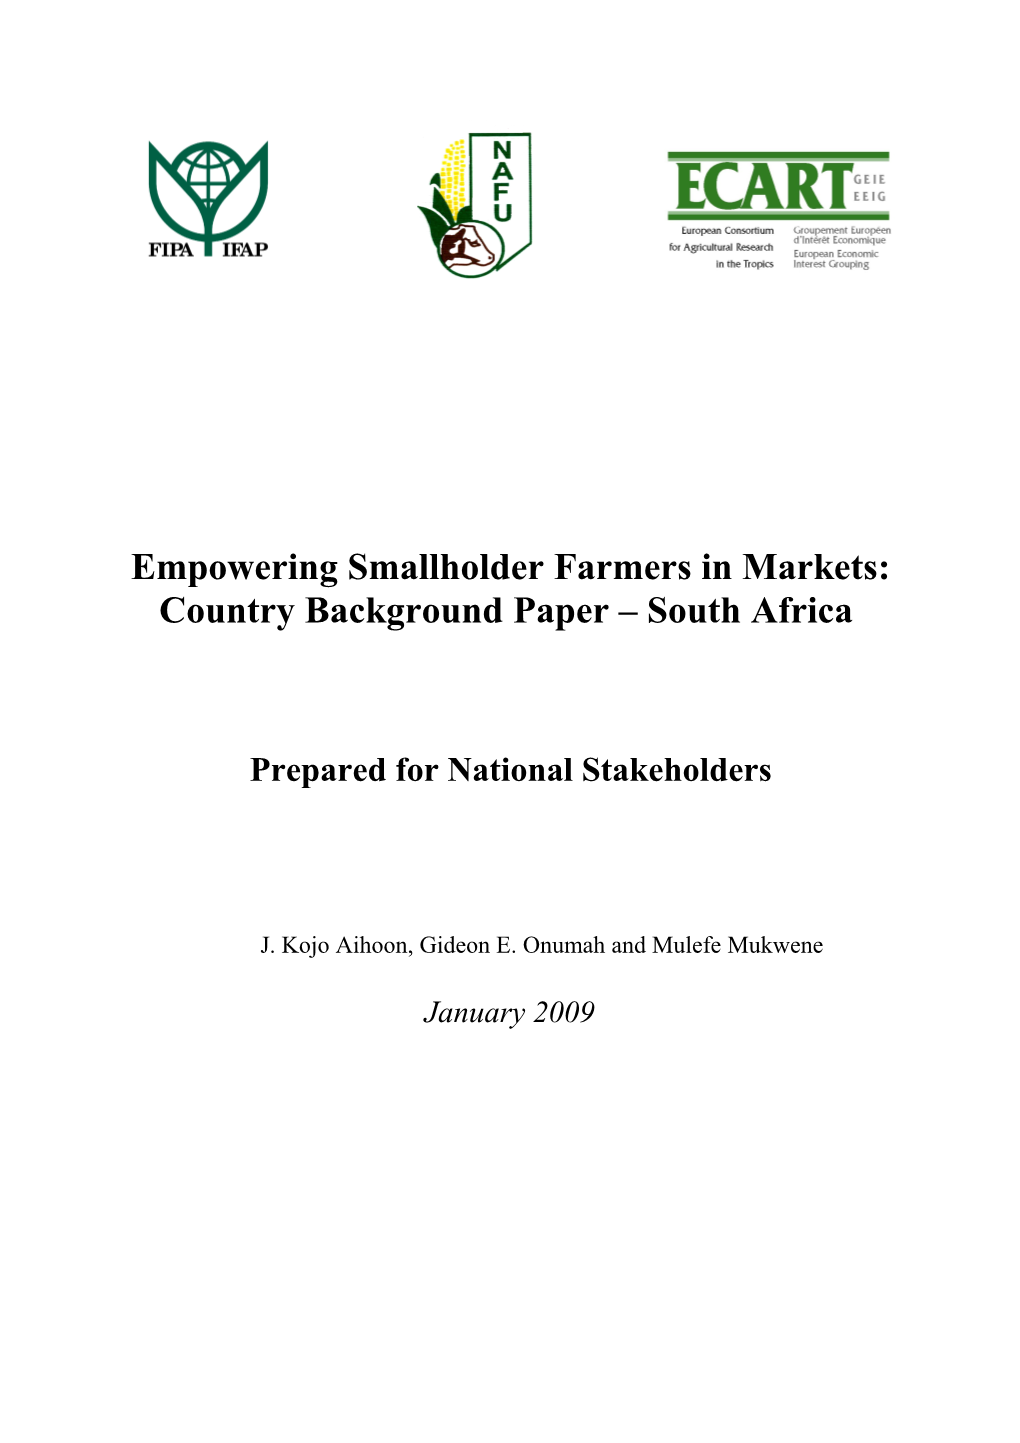 Empowering Smallholder Farmers in Markets: Country Background Paper South Africa